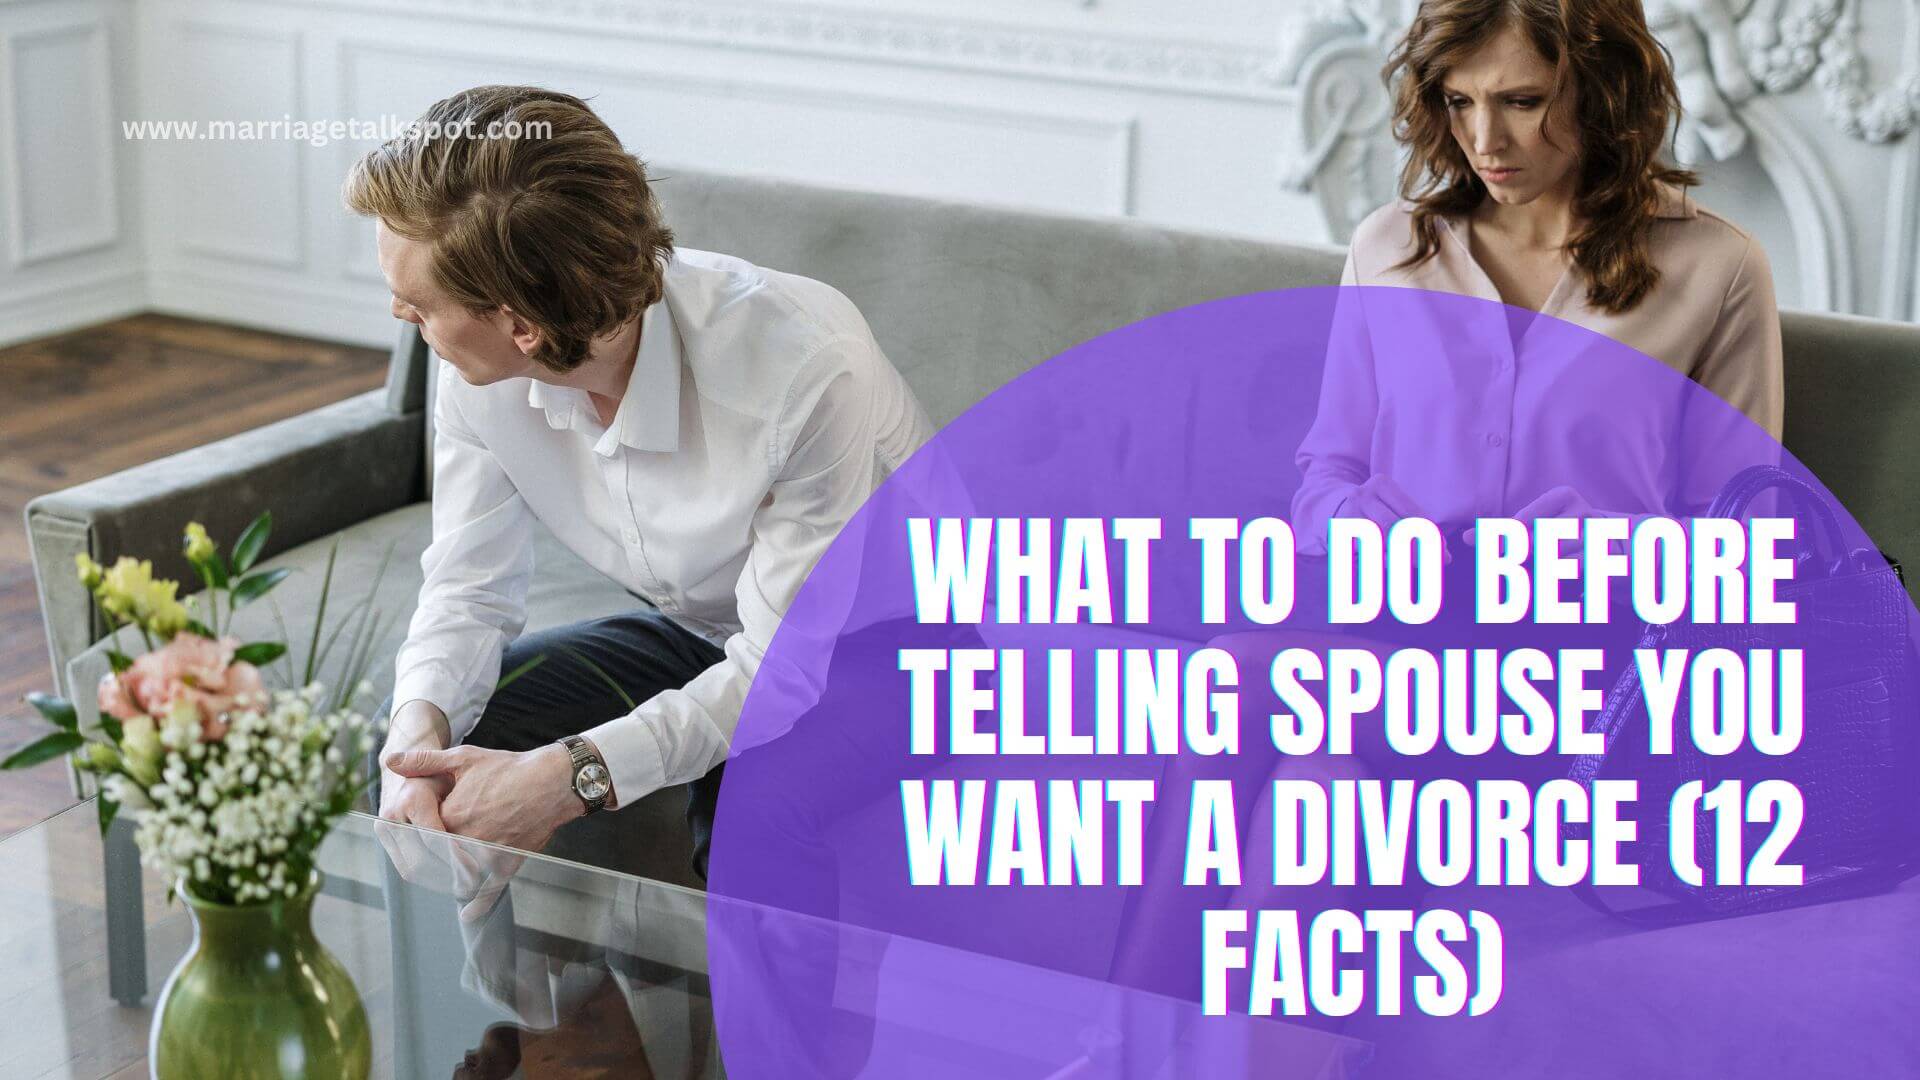 WHAT TO DO BEFORE TELLING SPOUSE YOU WANT A DIVORCE (12 FACTS) (1)